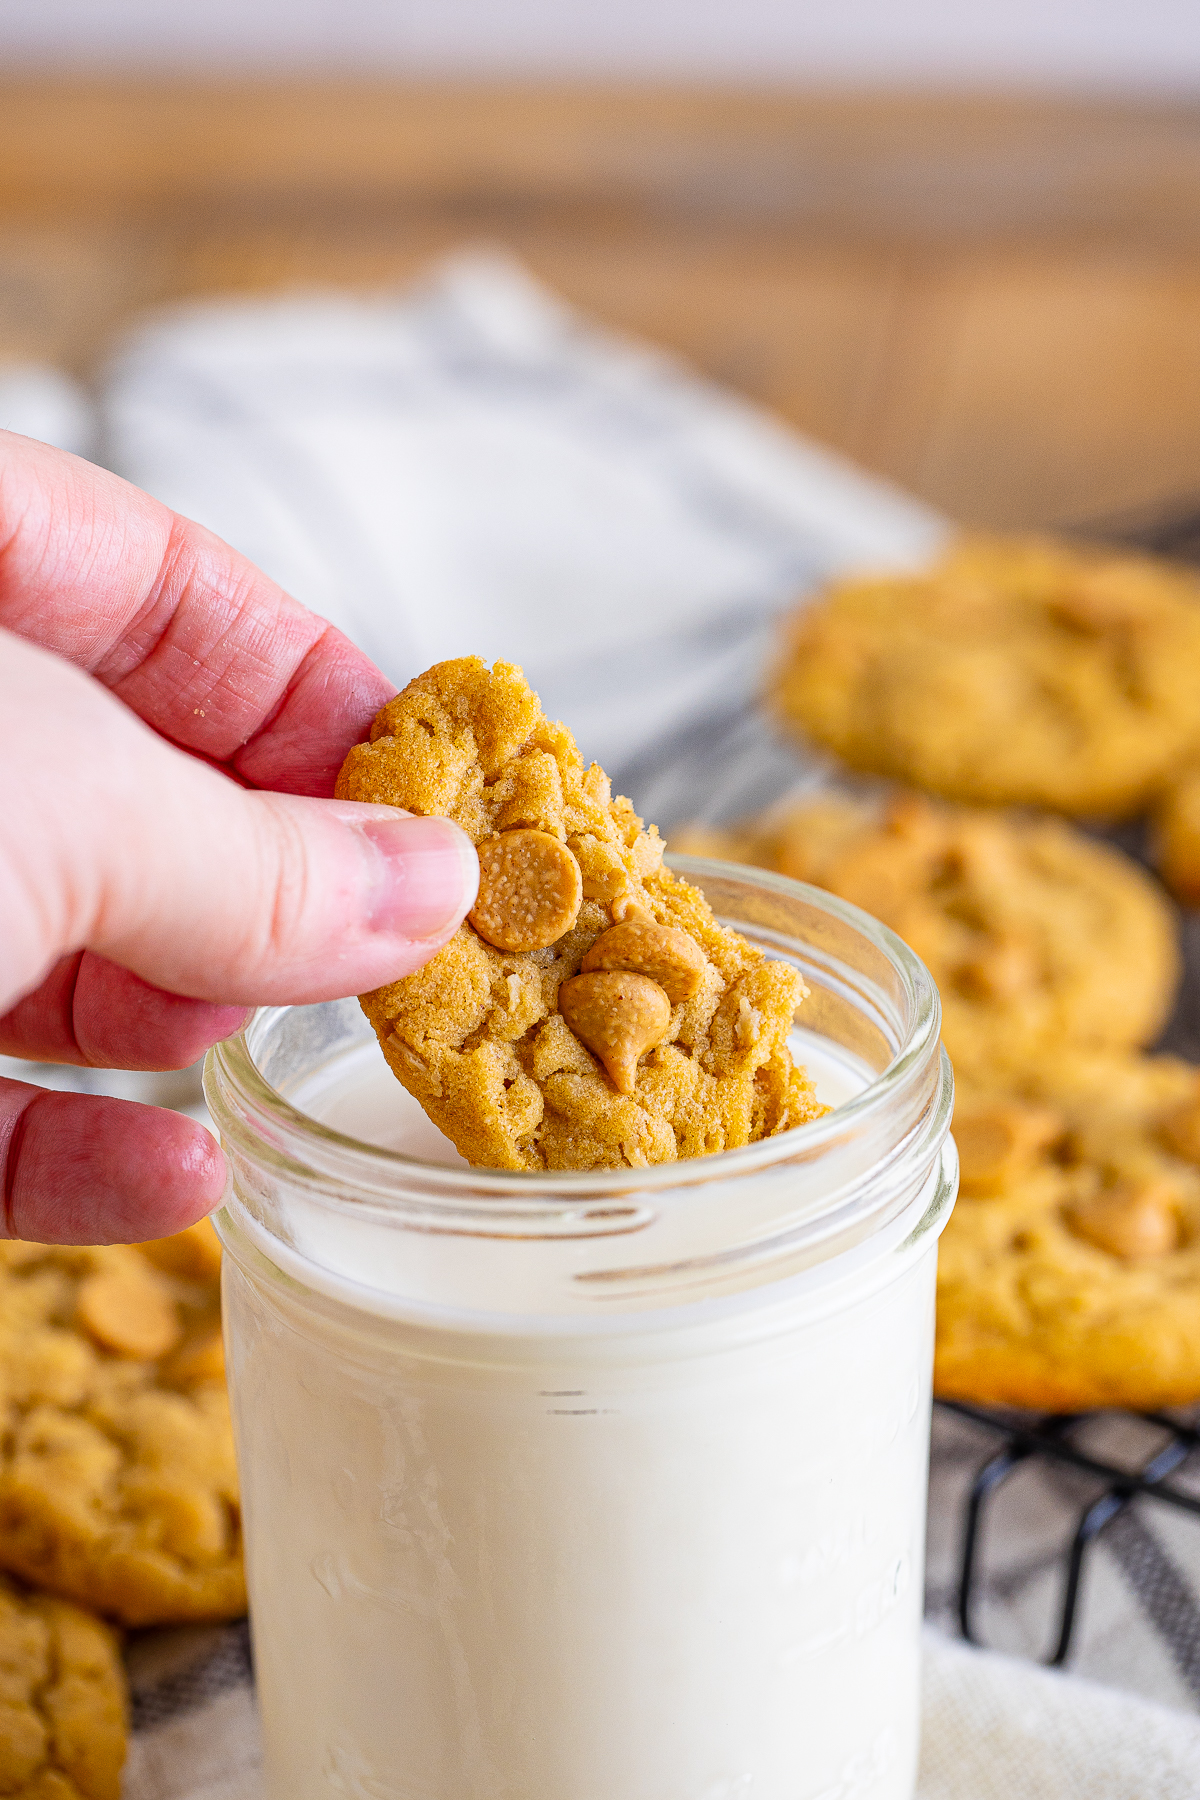 Hand dipping a portion of the Peanut Butter Oatmeal Cookie in milk.